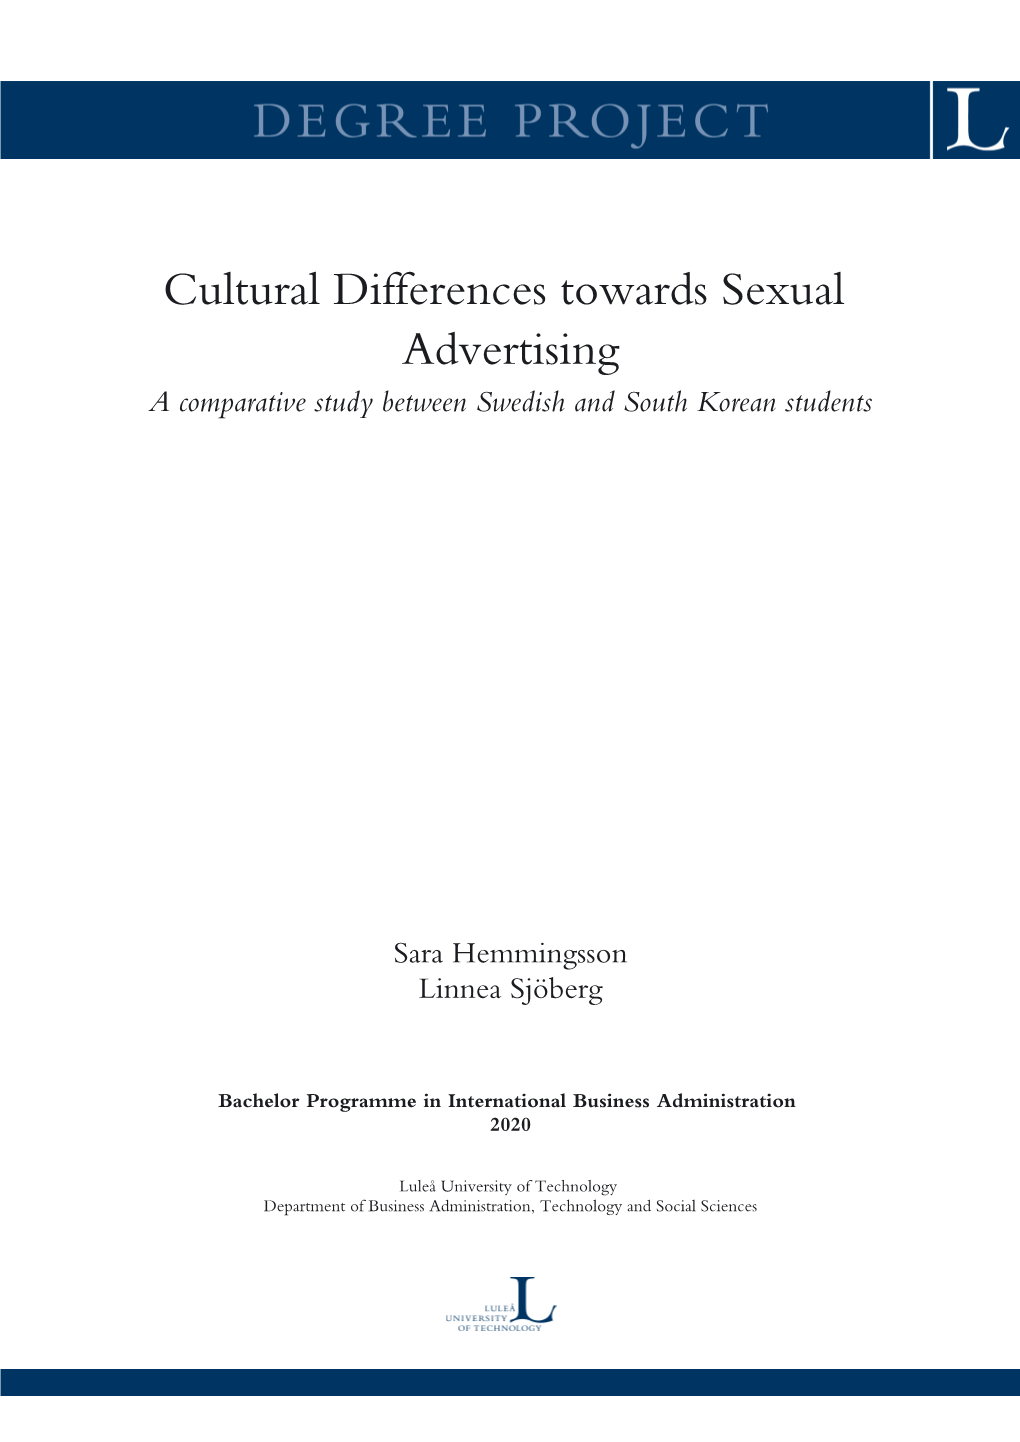 Cultural Differences Towards Sexual Advertising a Comparative Study Between Swedish and South Korean Students